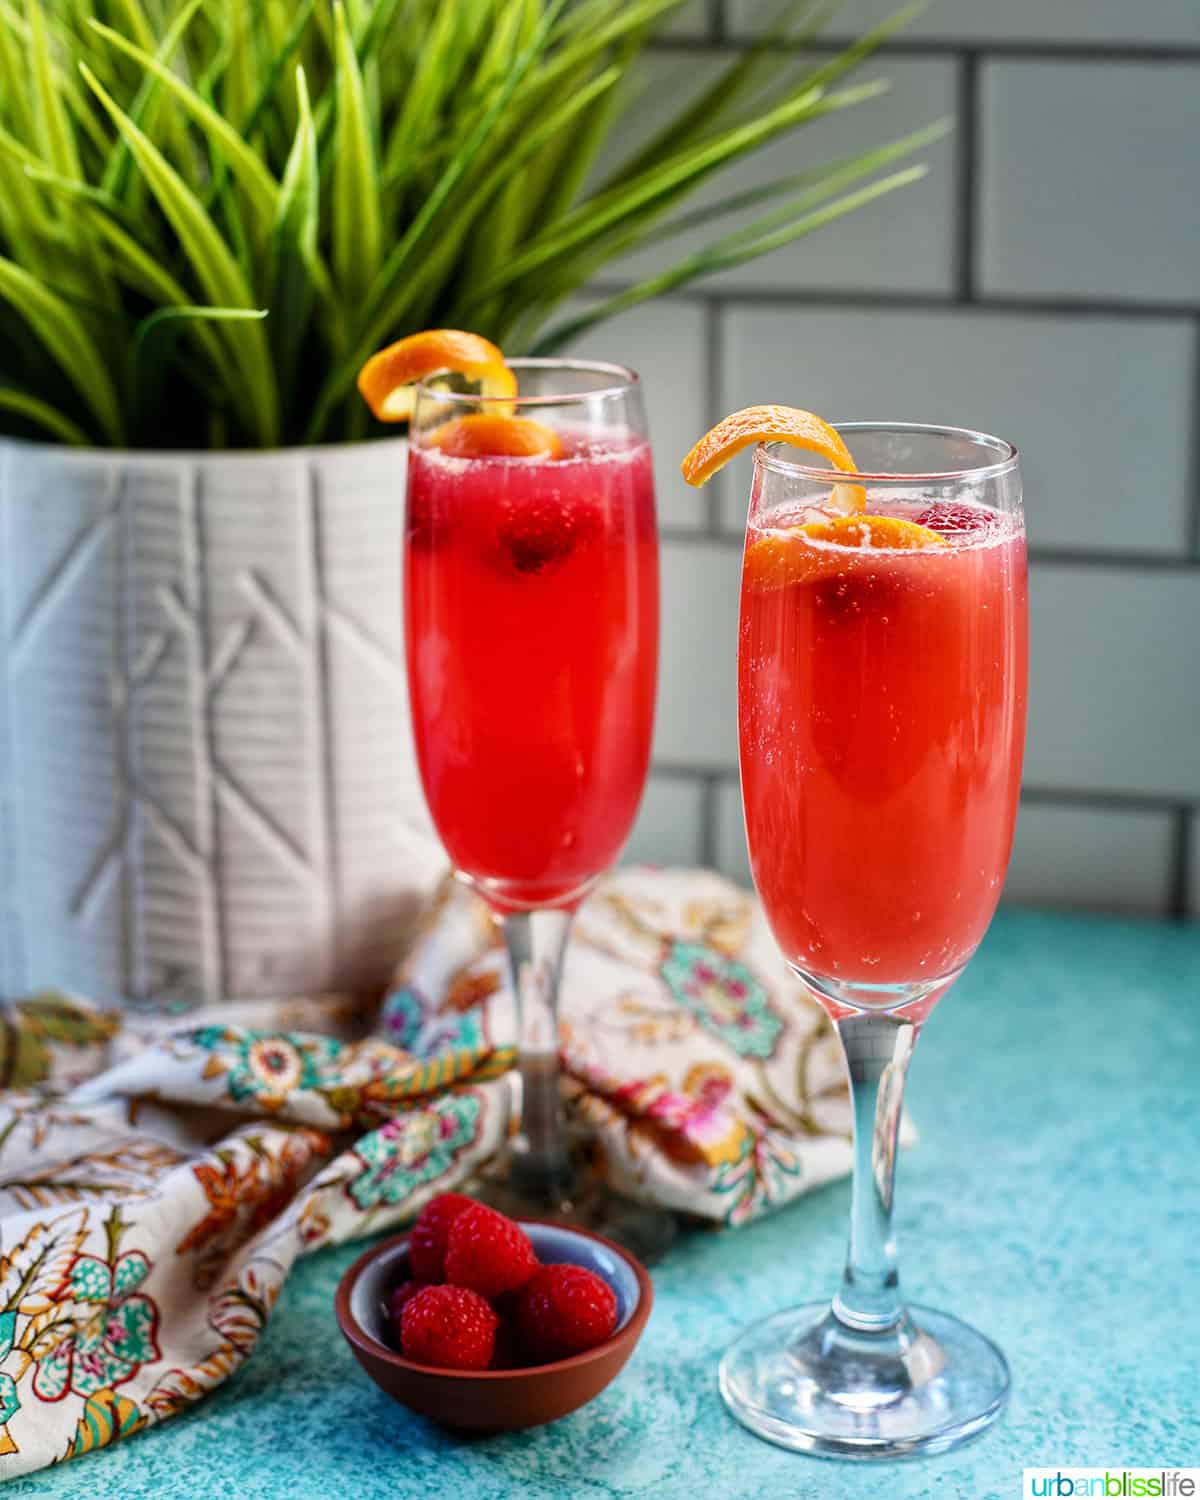 two glasses of Raspberry Mimosas Raspberry Mimosa with raspberries and orange rind garnish on blue background.